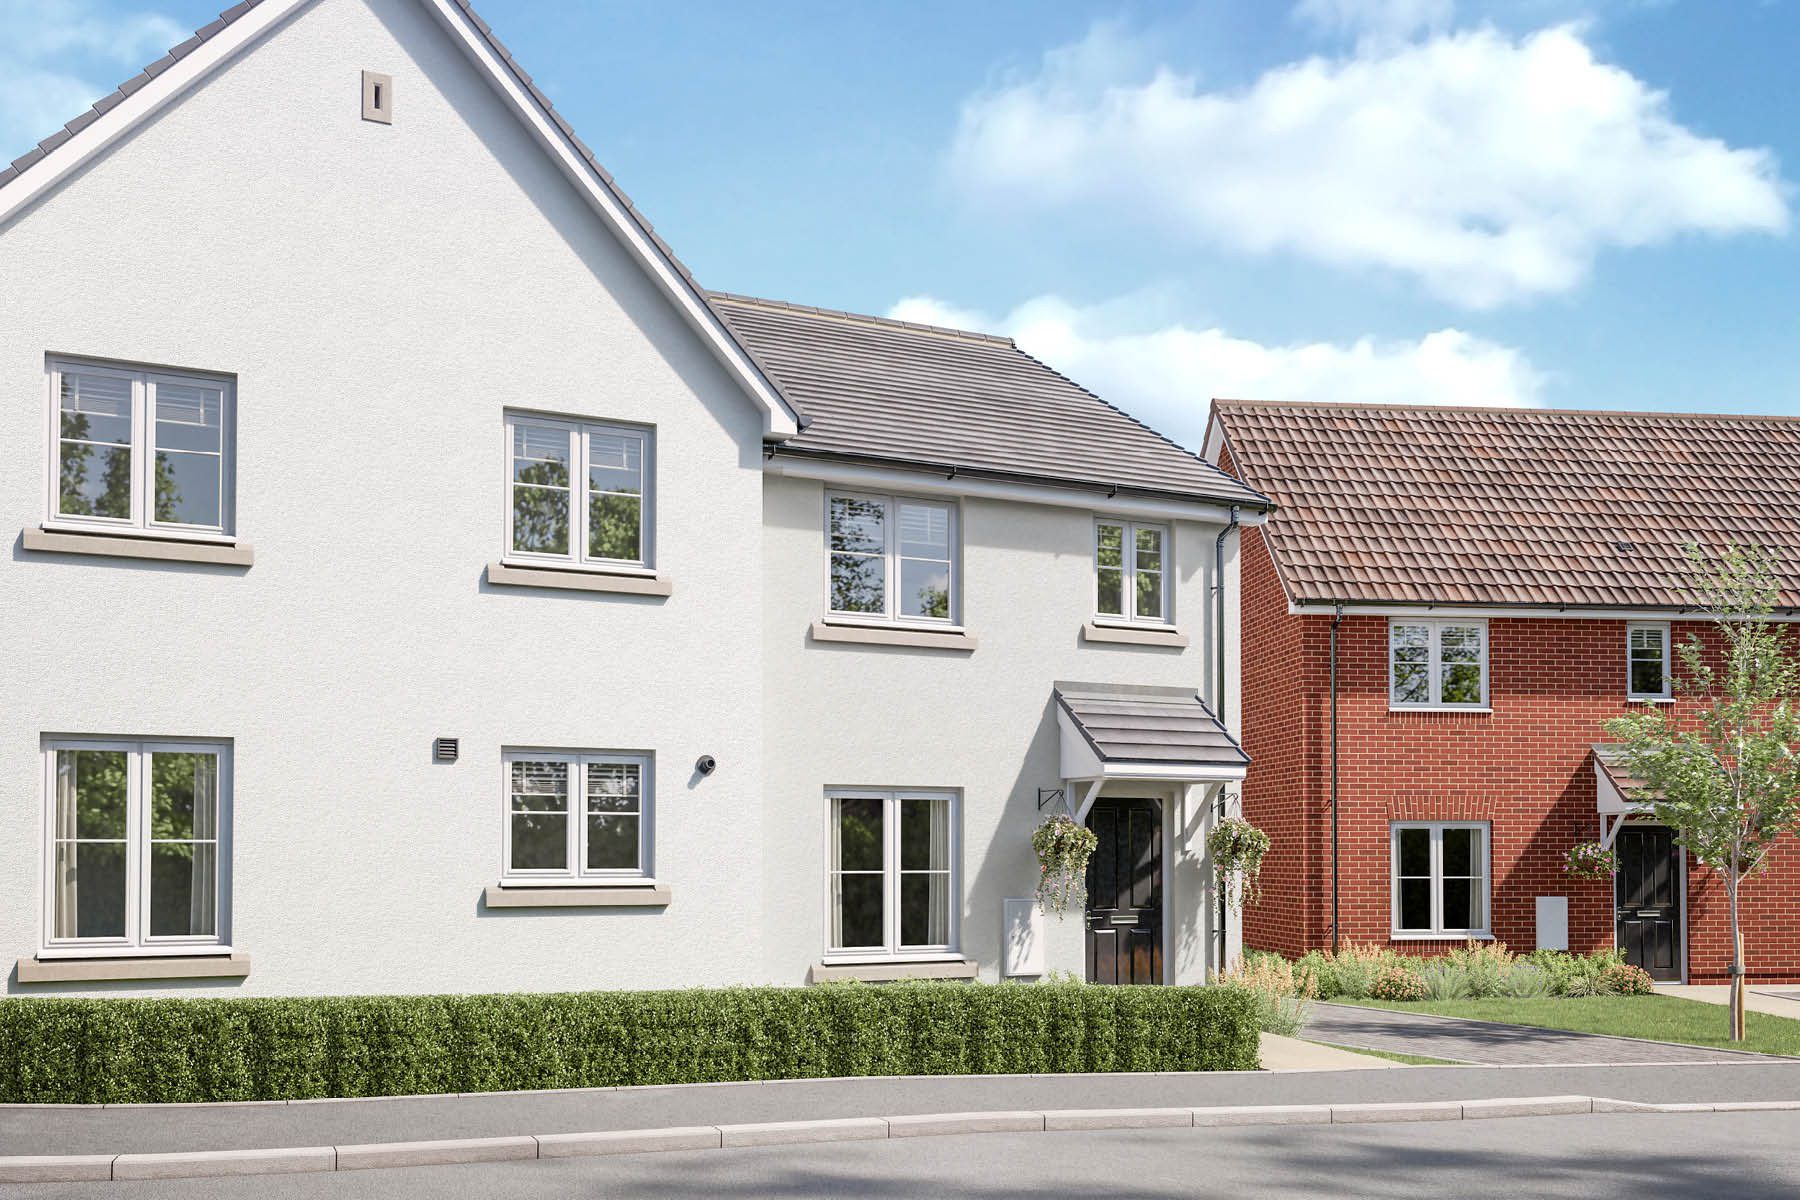 Taylor Wimpey announces launch of new homes at Kingsfleet